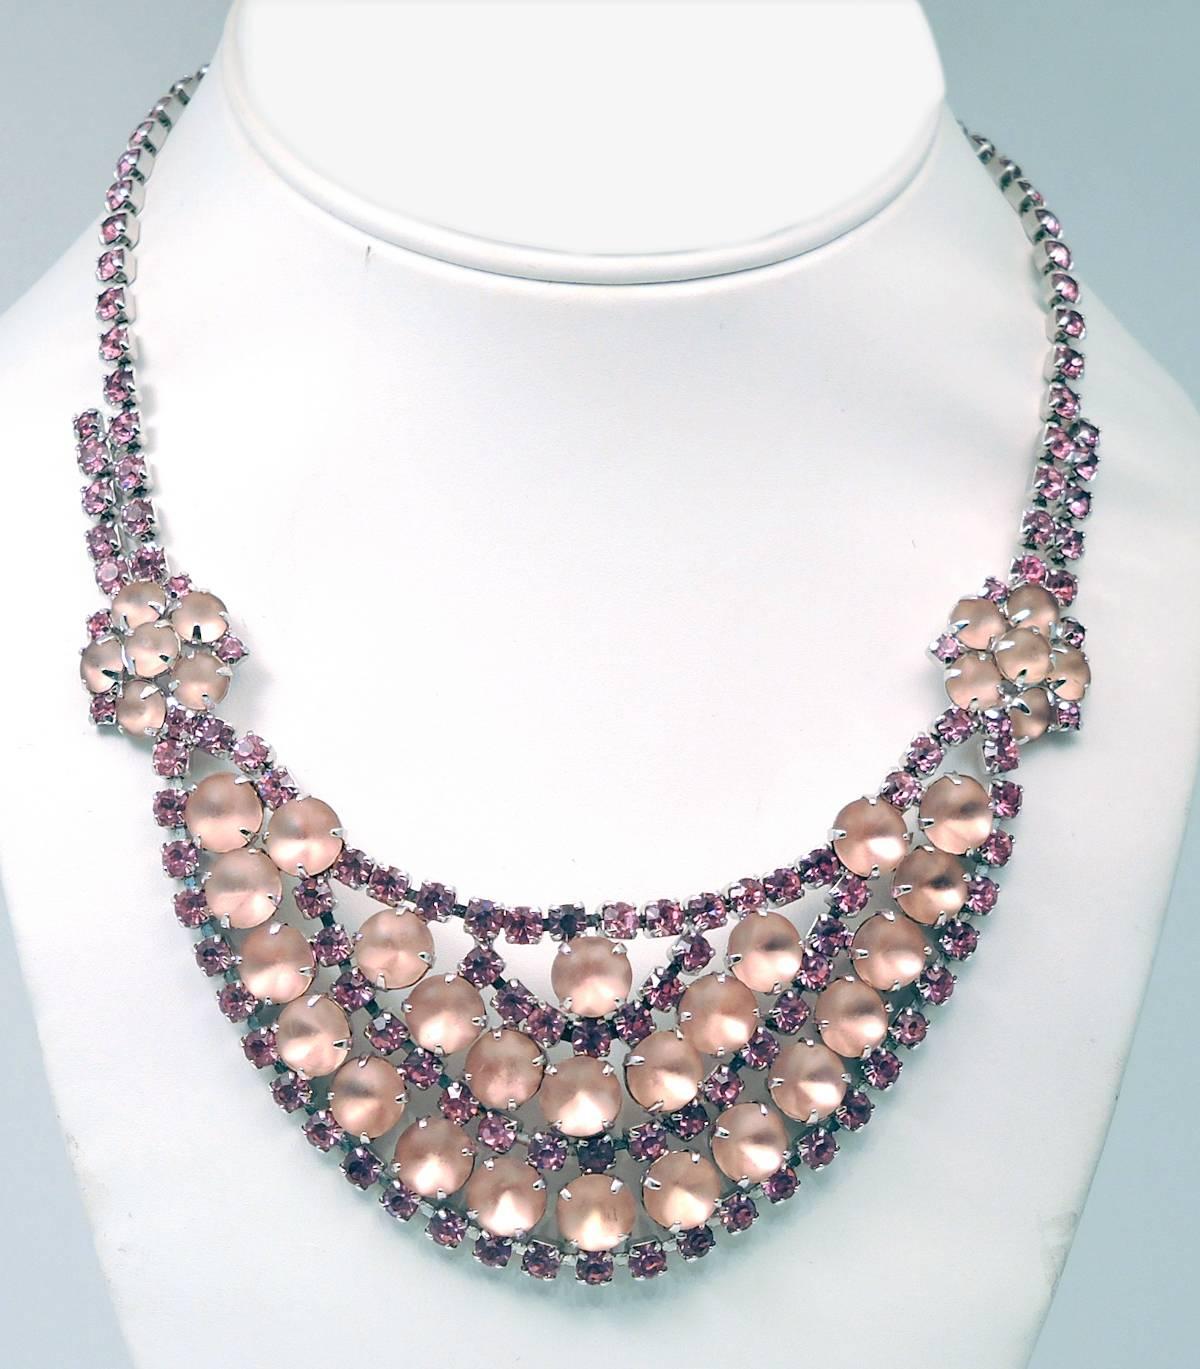 This is a beautiful 1960s pink necklace with an alternating combination of pink large moonstones and dazzling pink rhinestones. It has a hook clasp. This necklace measures 16” x 2” and has a silver tone setting. It is in excellent condition. 